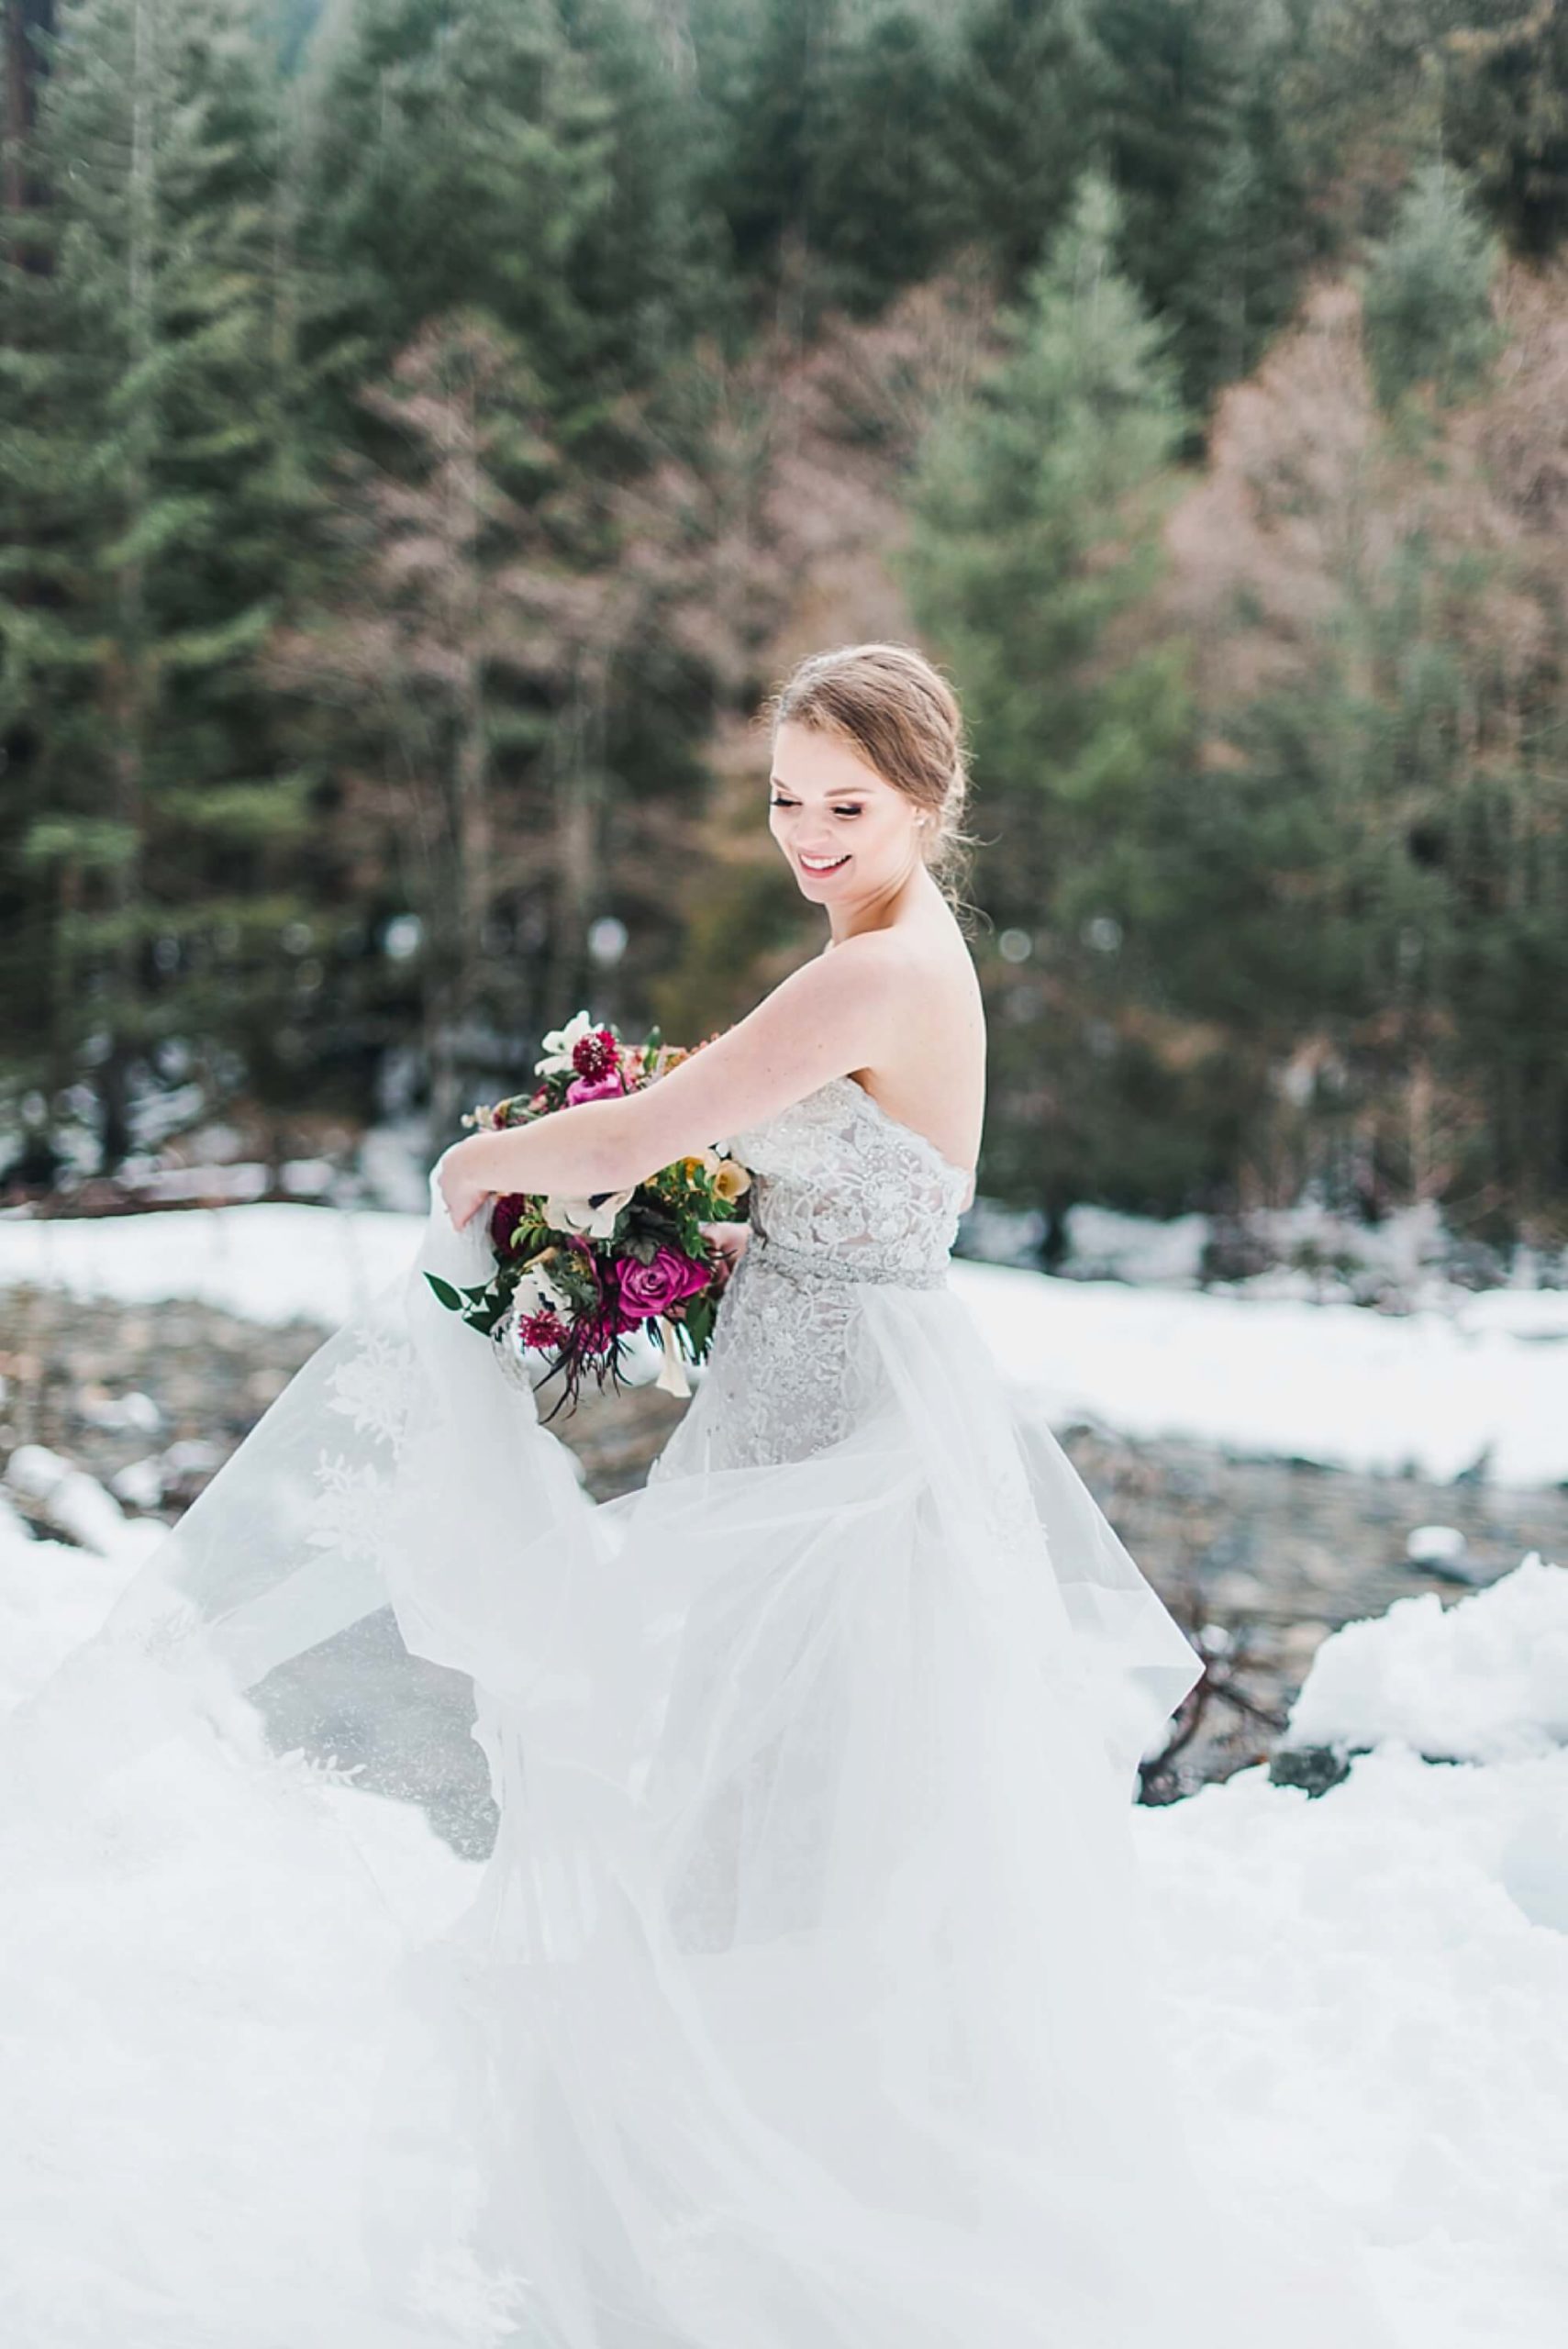 Snowy Seattle elopement at Snoqualmie